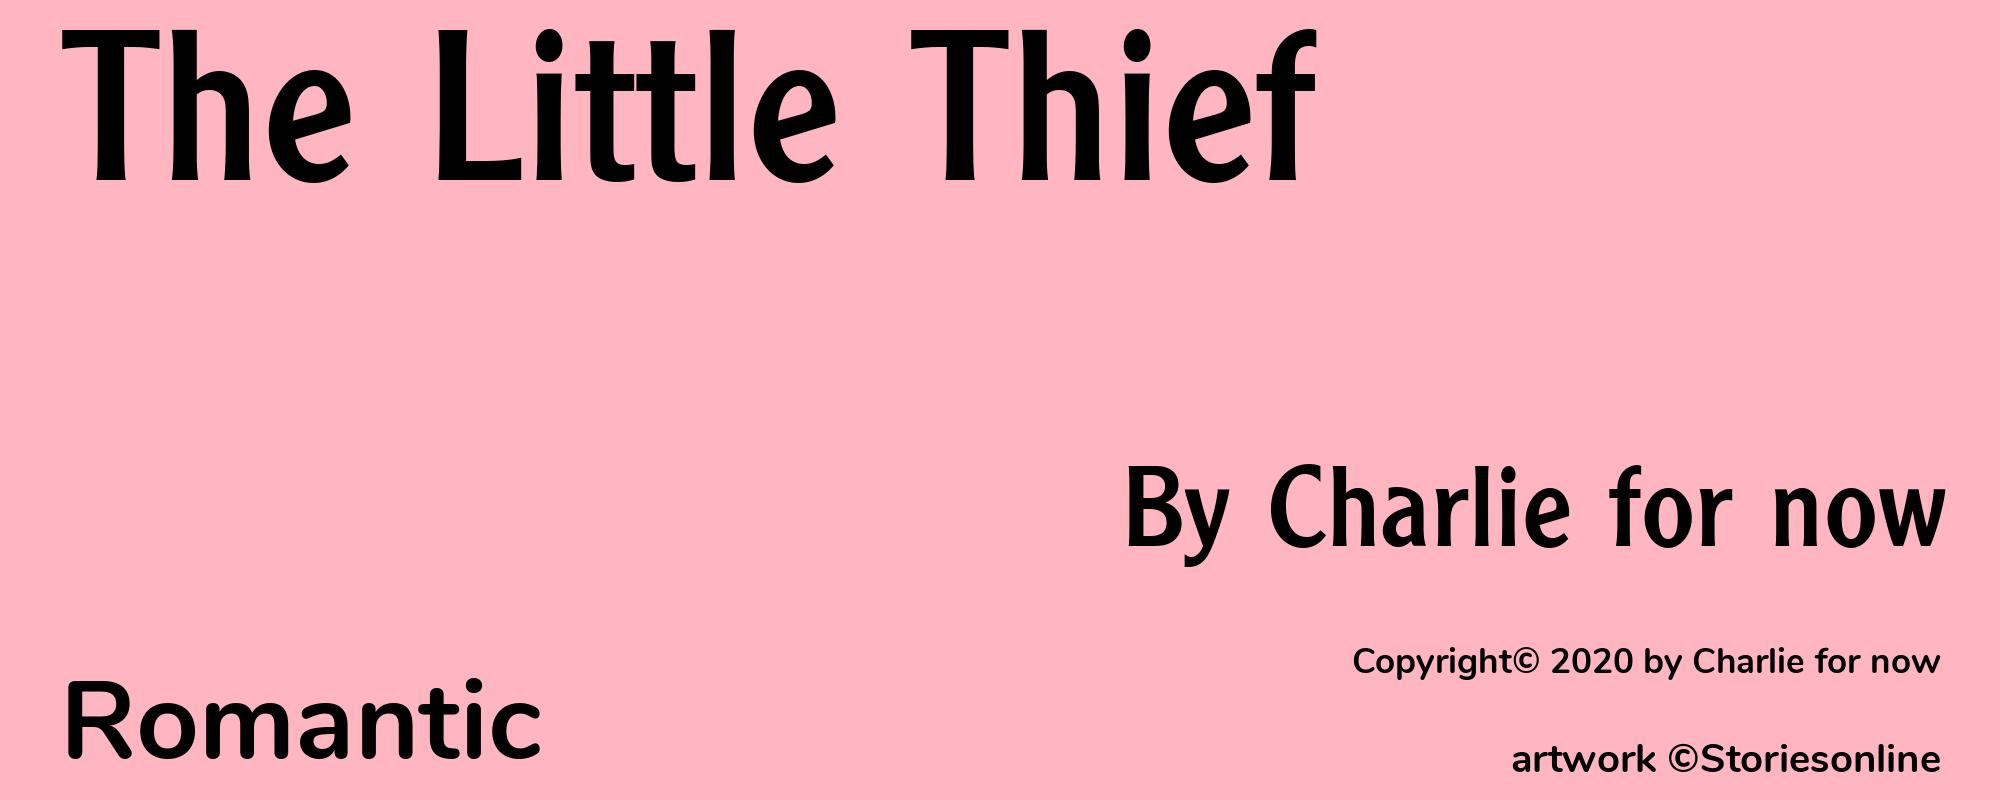 The Little Thief - Cover